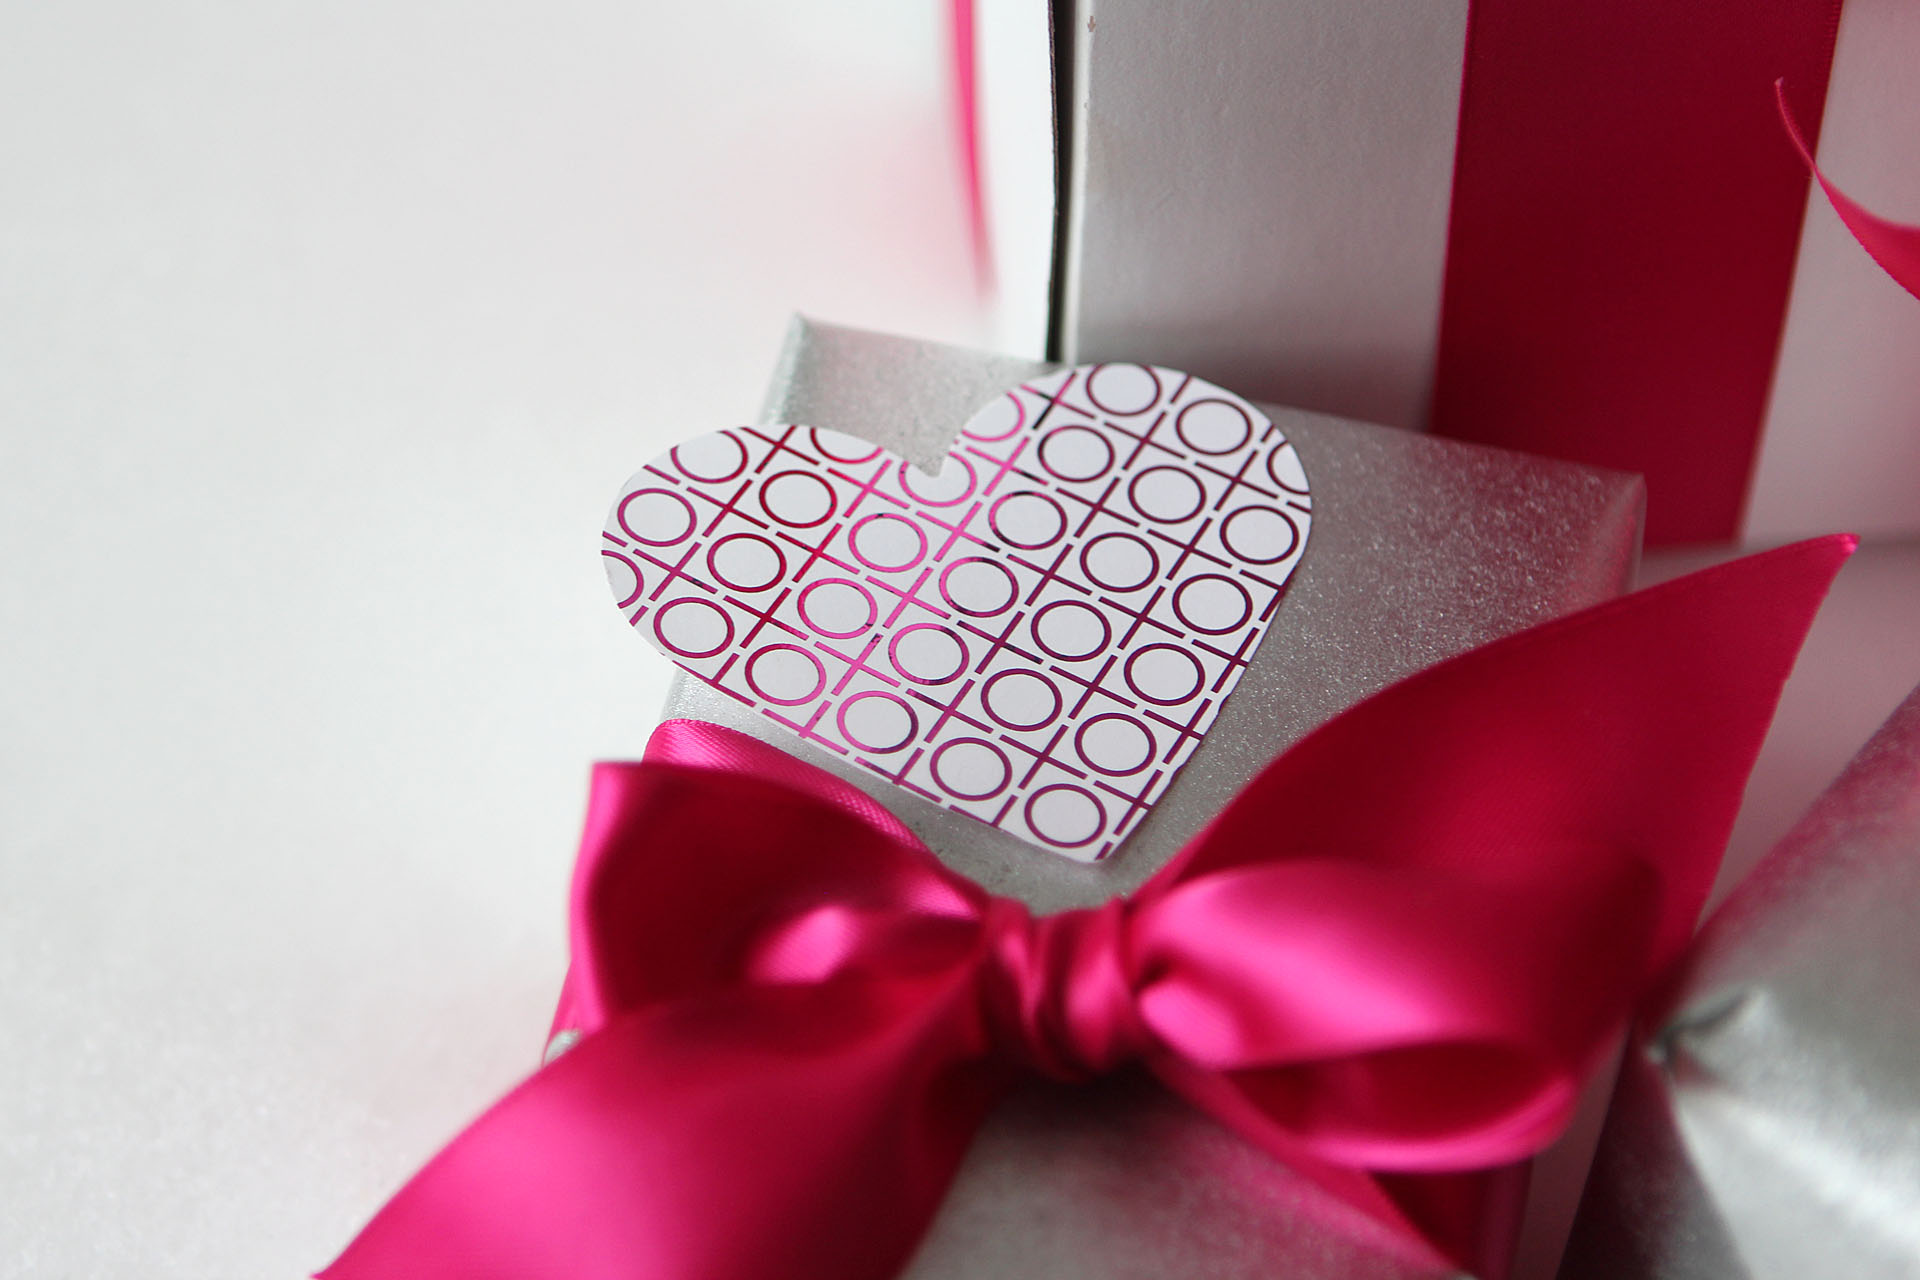 Printable Valentine's Day Gift Tags | X Height Ment